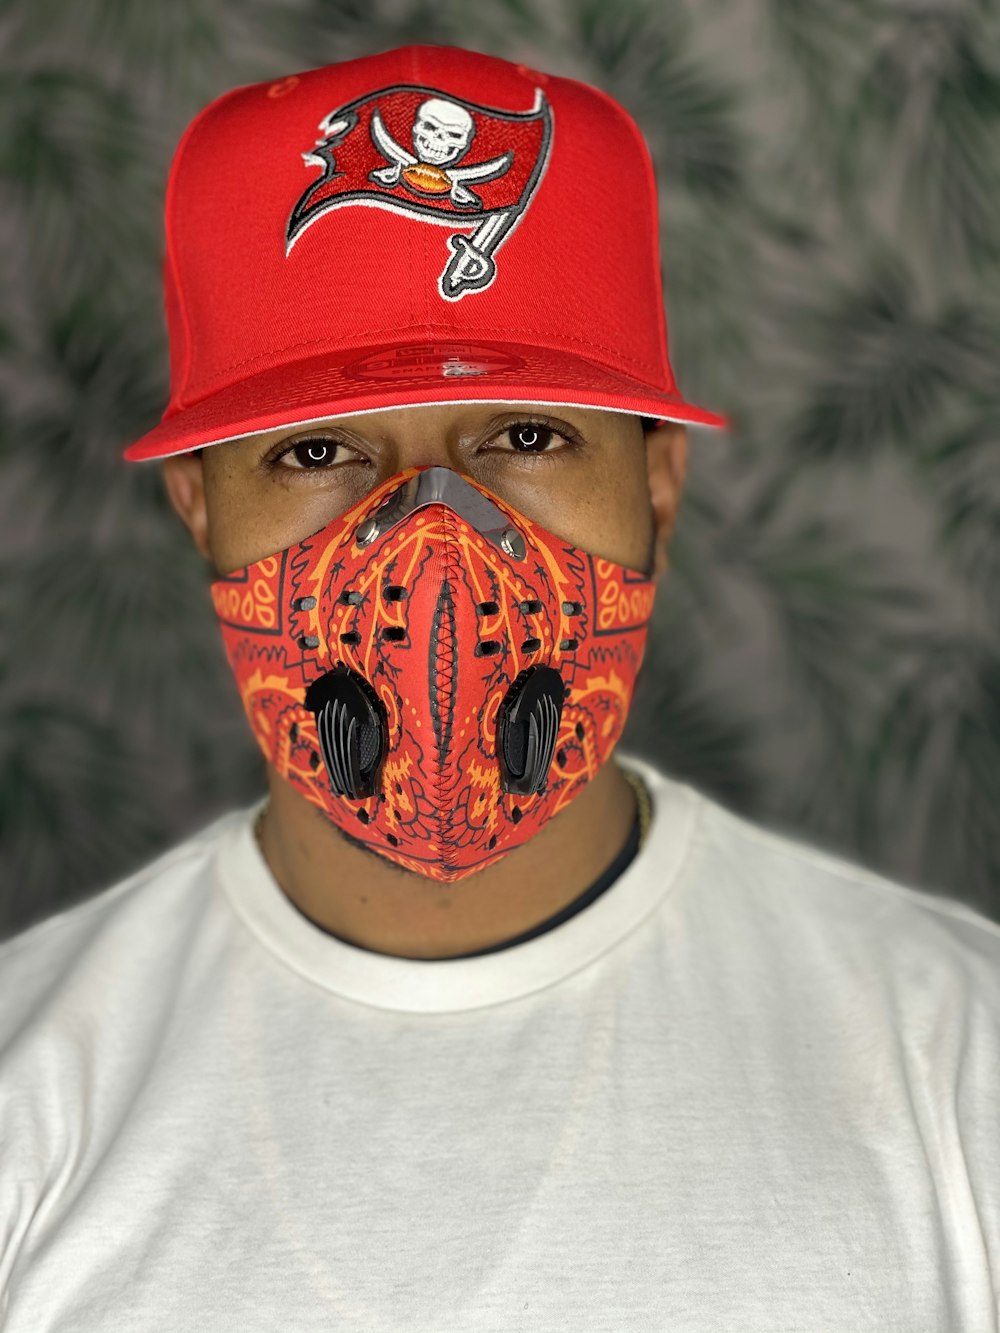 man in white crew neck shirt wearing red and black mask